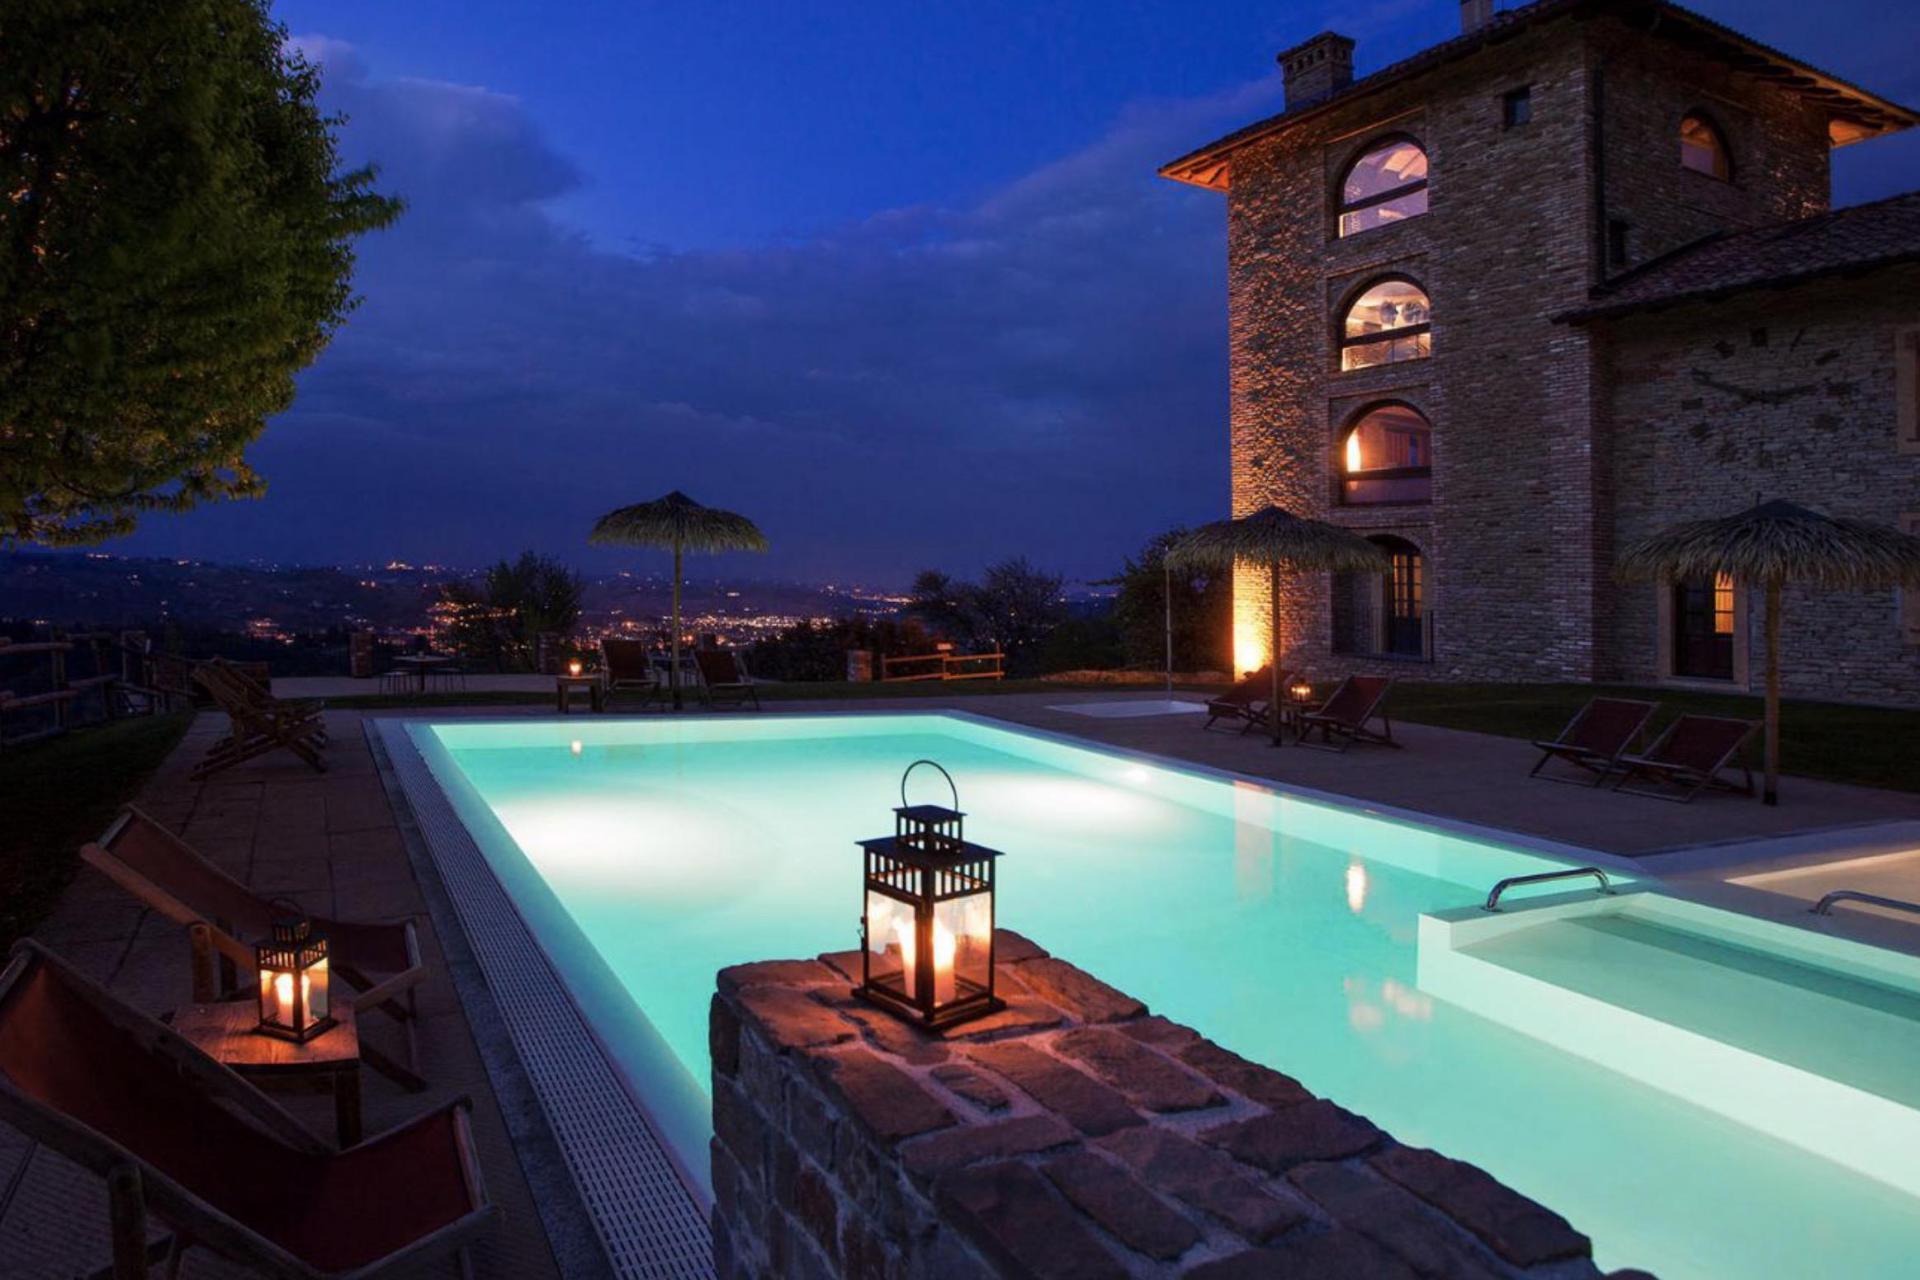 Agriturismo in the heart of Piemonte for pure relaxation